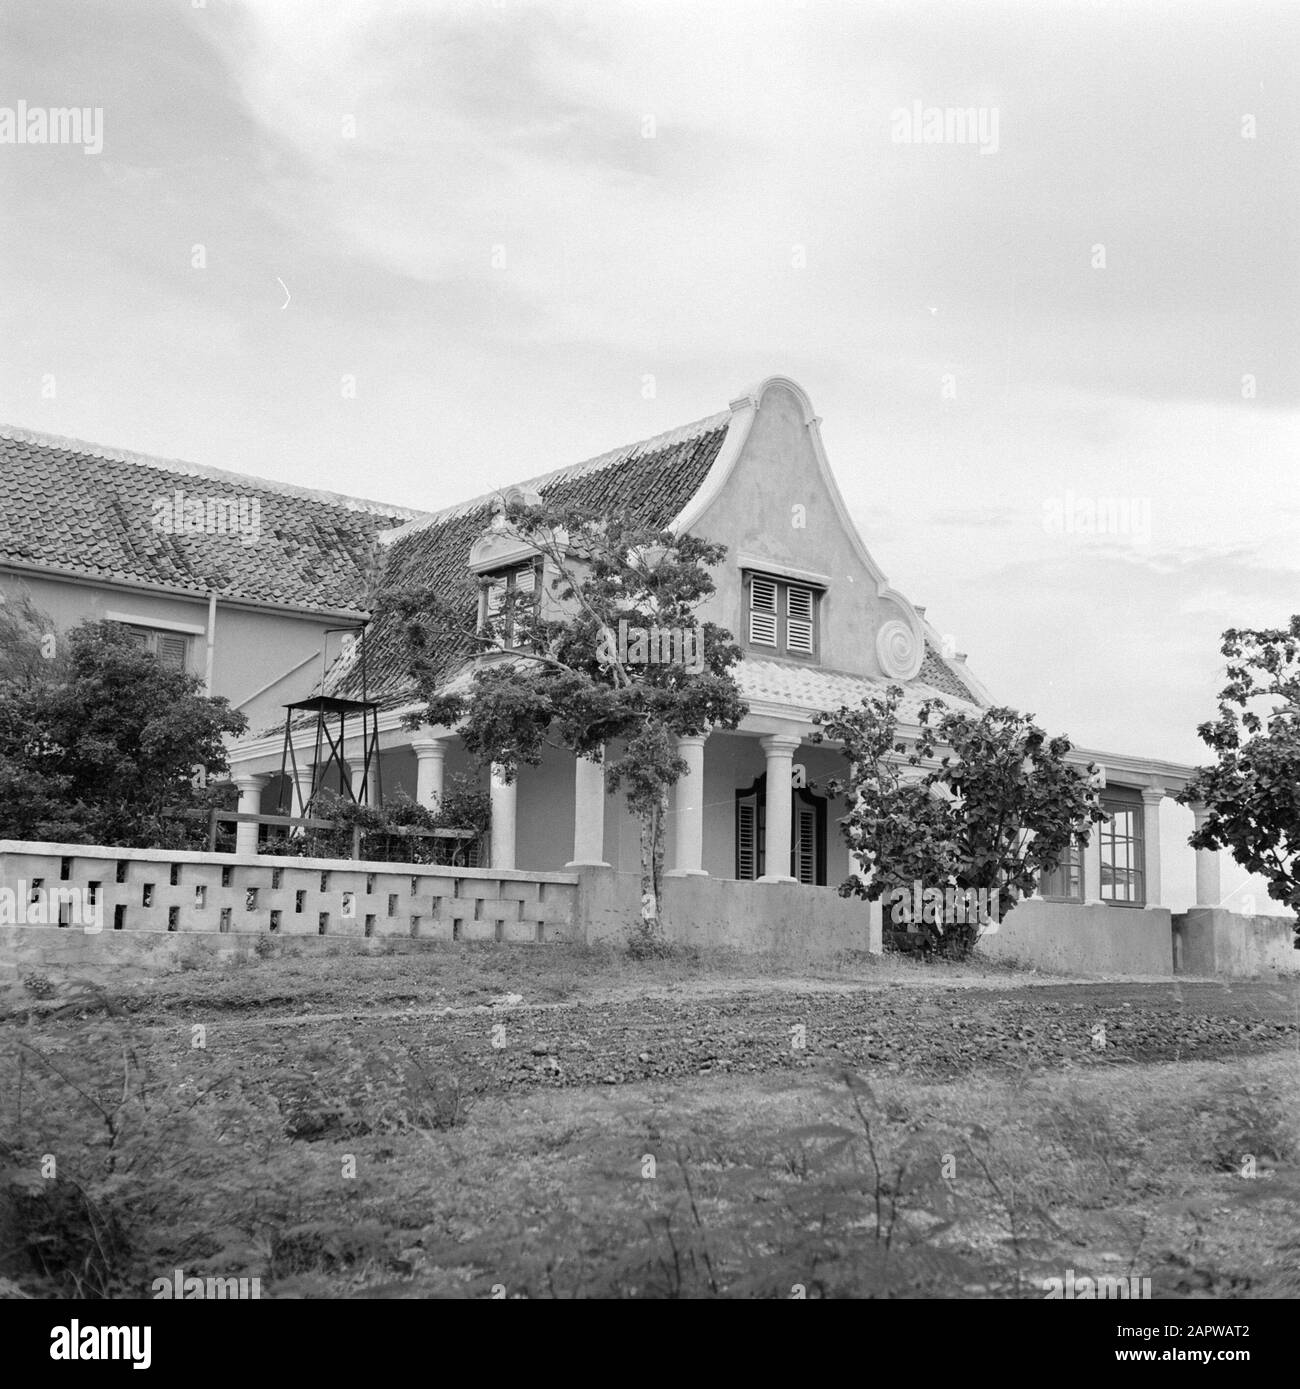 Netherlands Antilles and Suriname at the time of the royal visit of Queen Juliana and Prince Bernhard in 1955  Country house Zeelandia on Curaçao Date: October 1955 Location: Curaçao Keywords: buildings Stock Photo